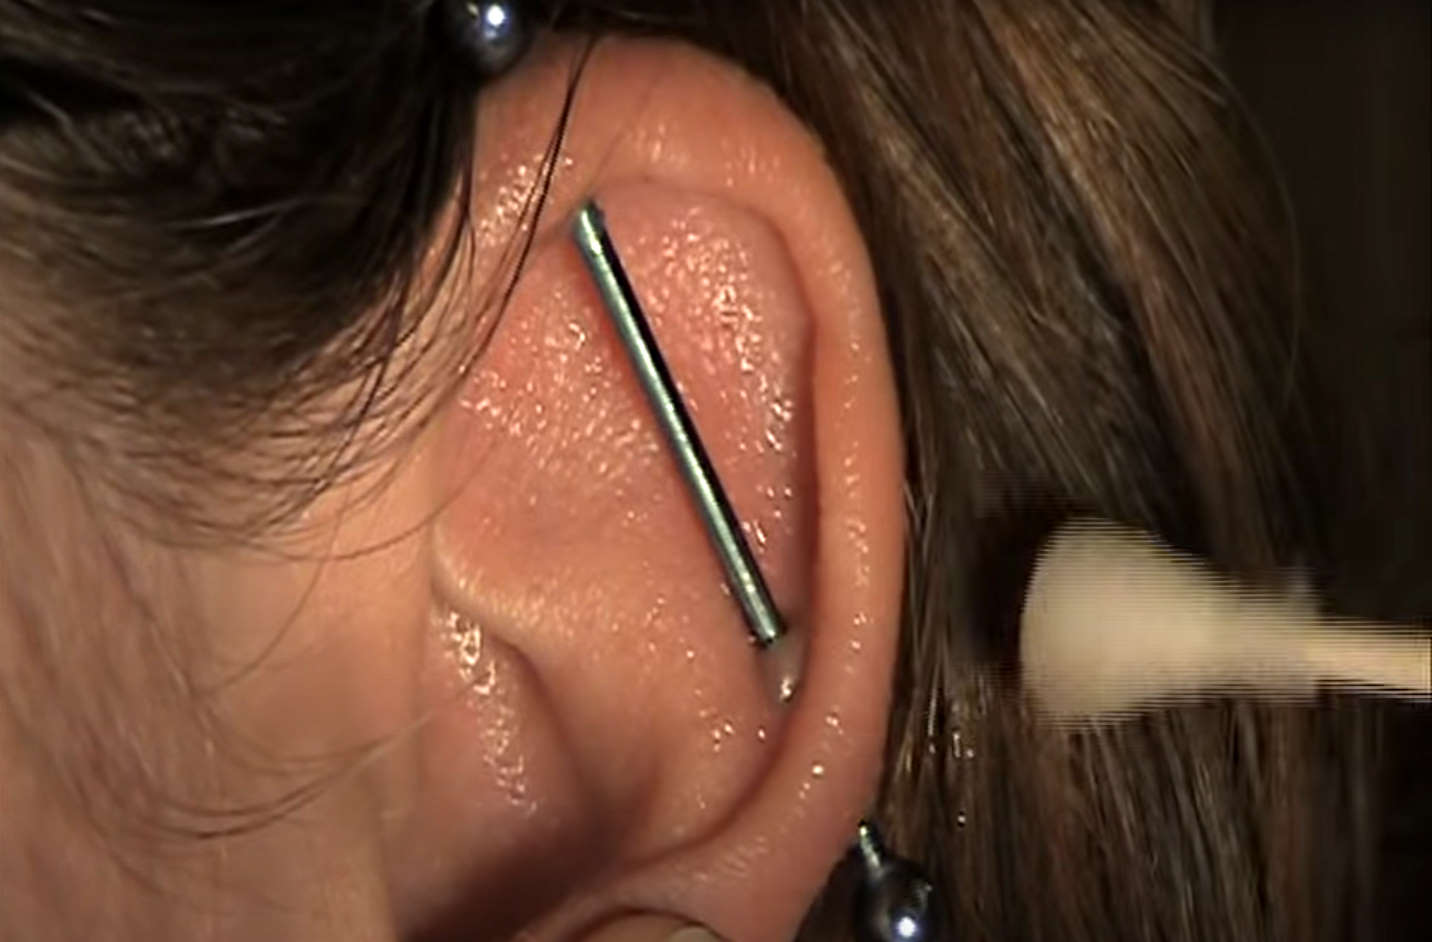 A close up of an industrial piercing being cleaned by a Q-tip.